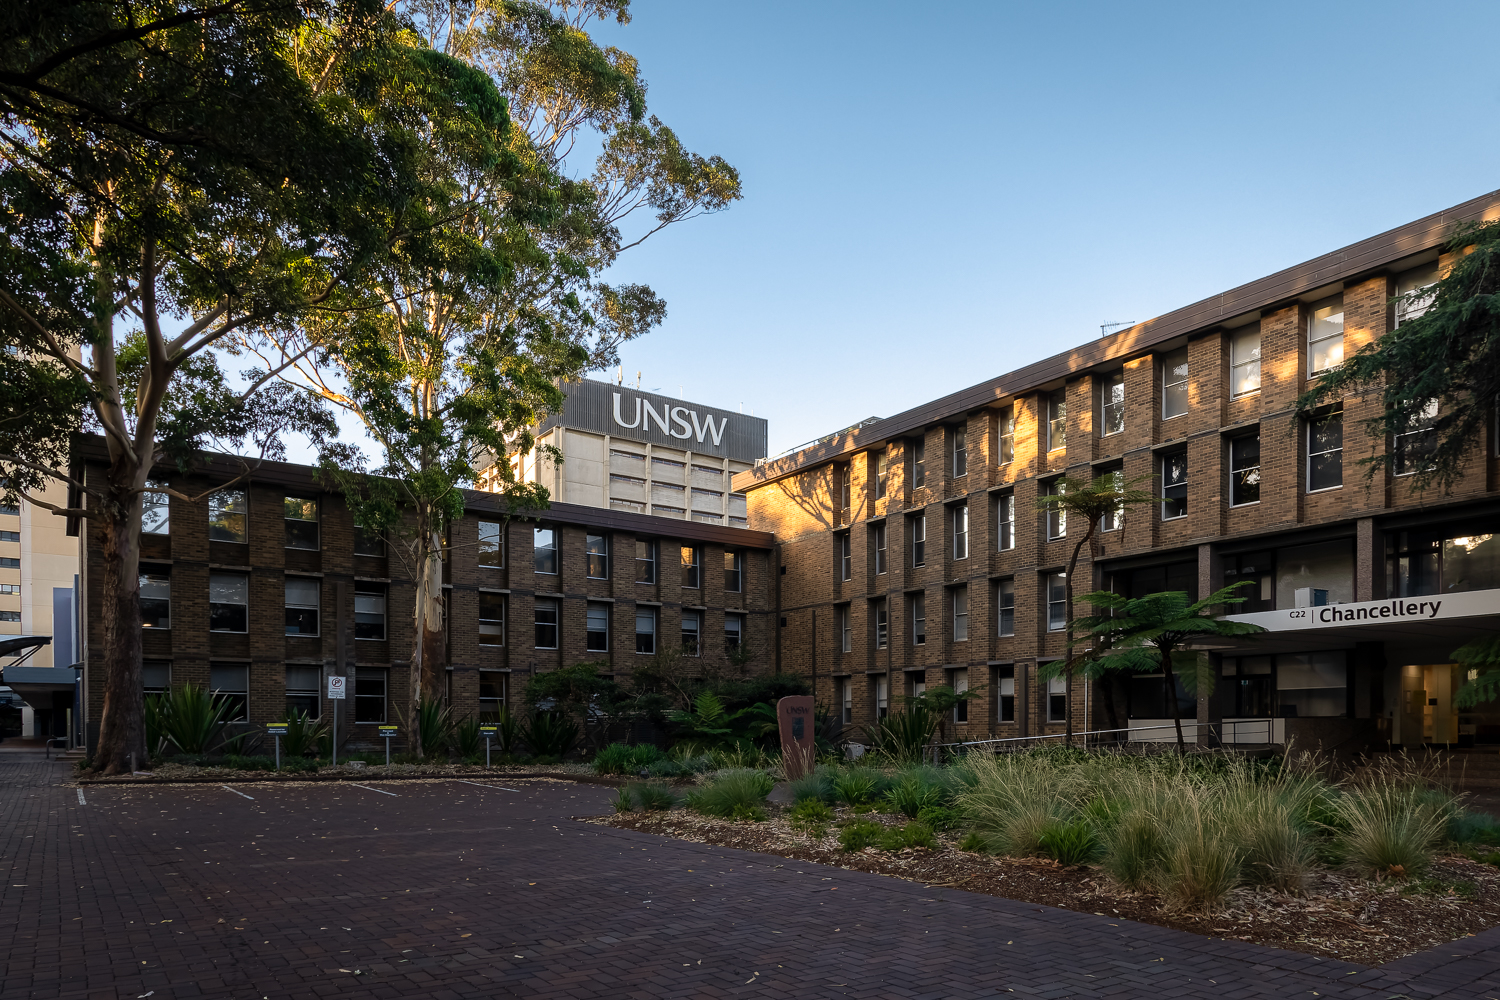 An angled three and four story brick building with a UNSW tower in the background